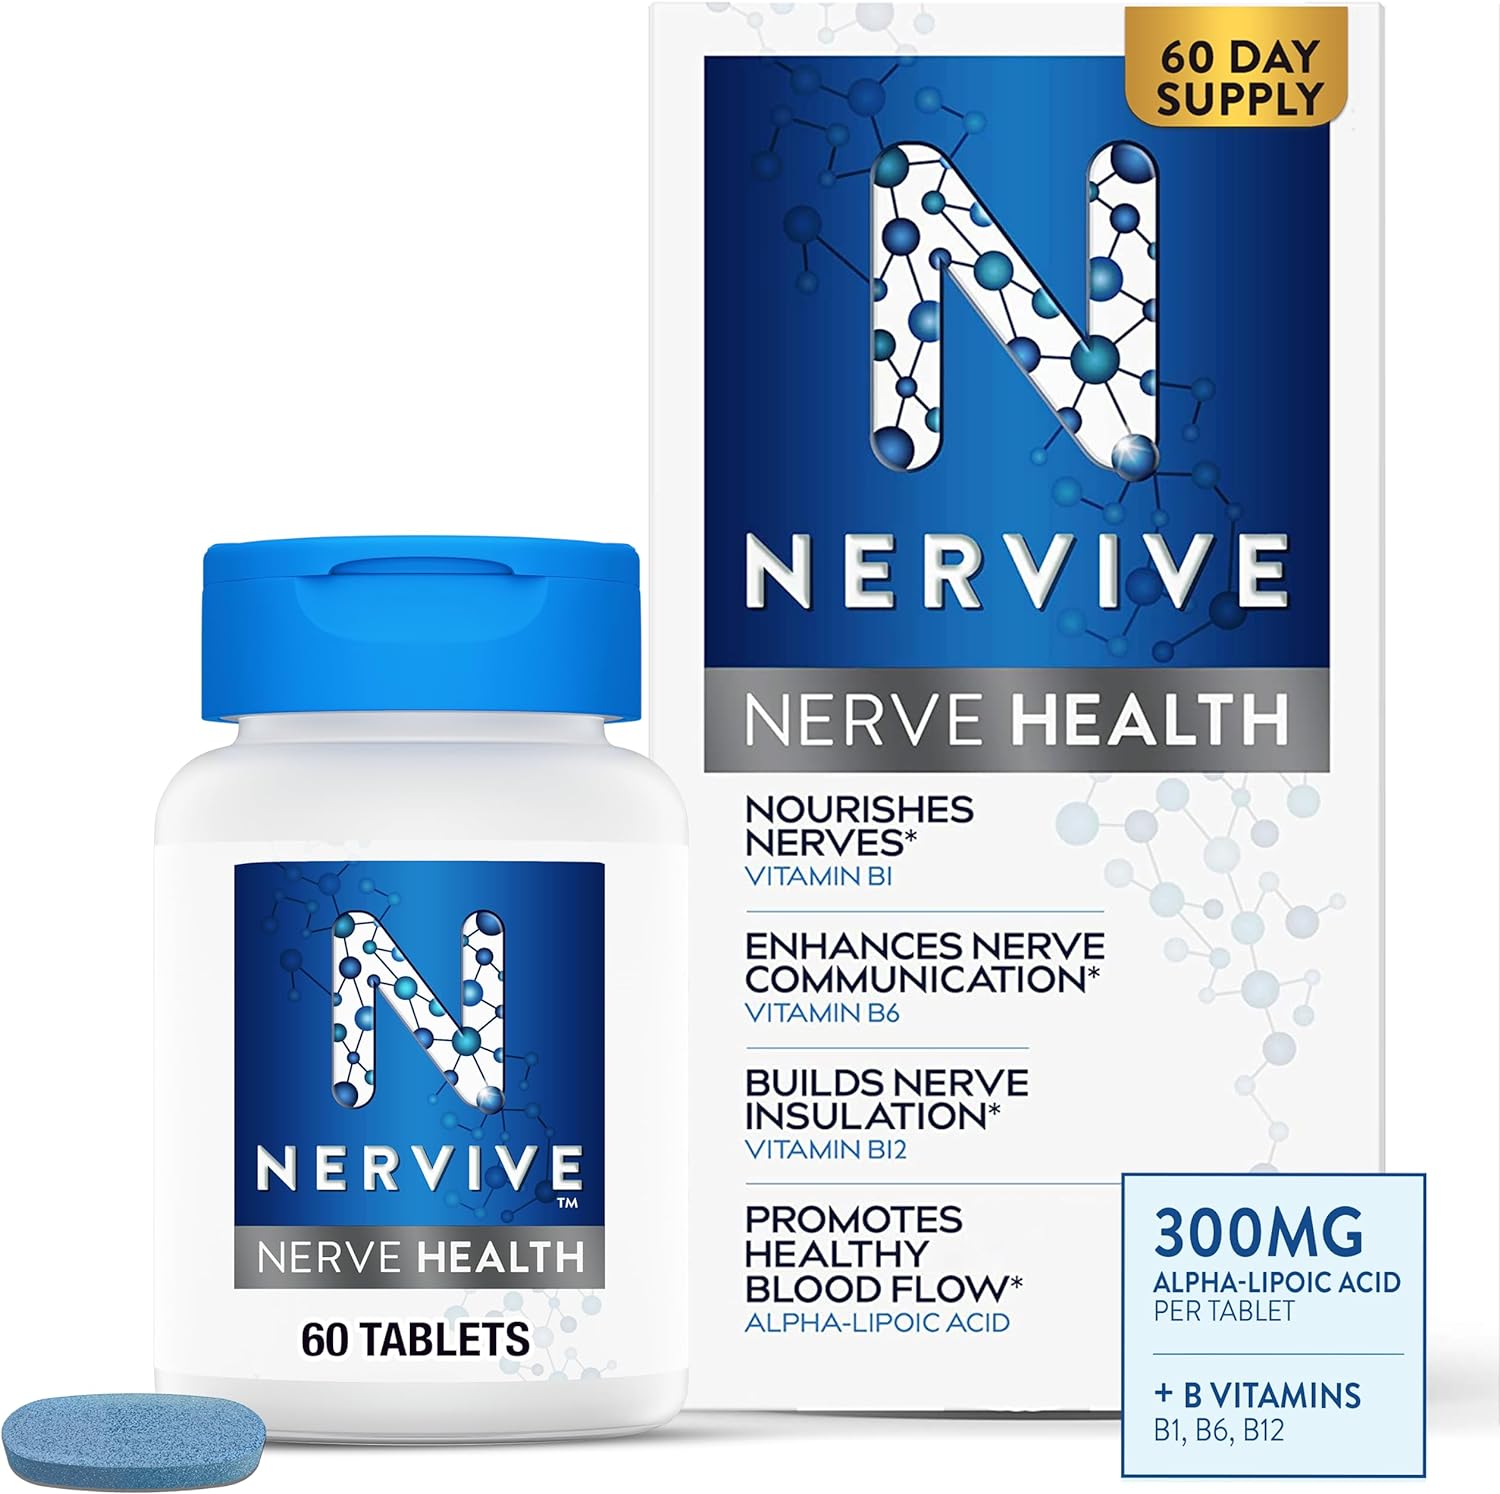 Nervive Nerve Health, with Alpha Lipoic Acid, to Fortify Nerve Health and Support Healthy Nerve Function in Fingers, Hands, Toes, & Feet*, ALA, Vitamins B12, B6, & B1, 60 Daily Tablets